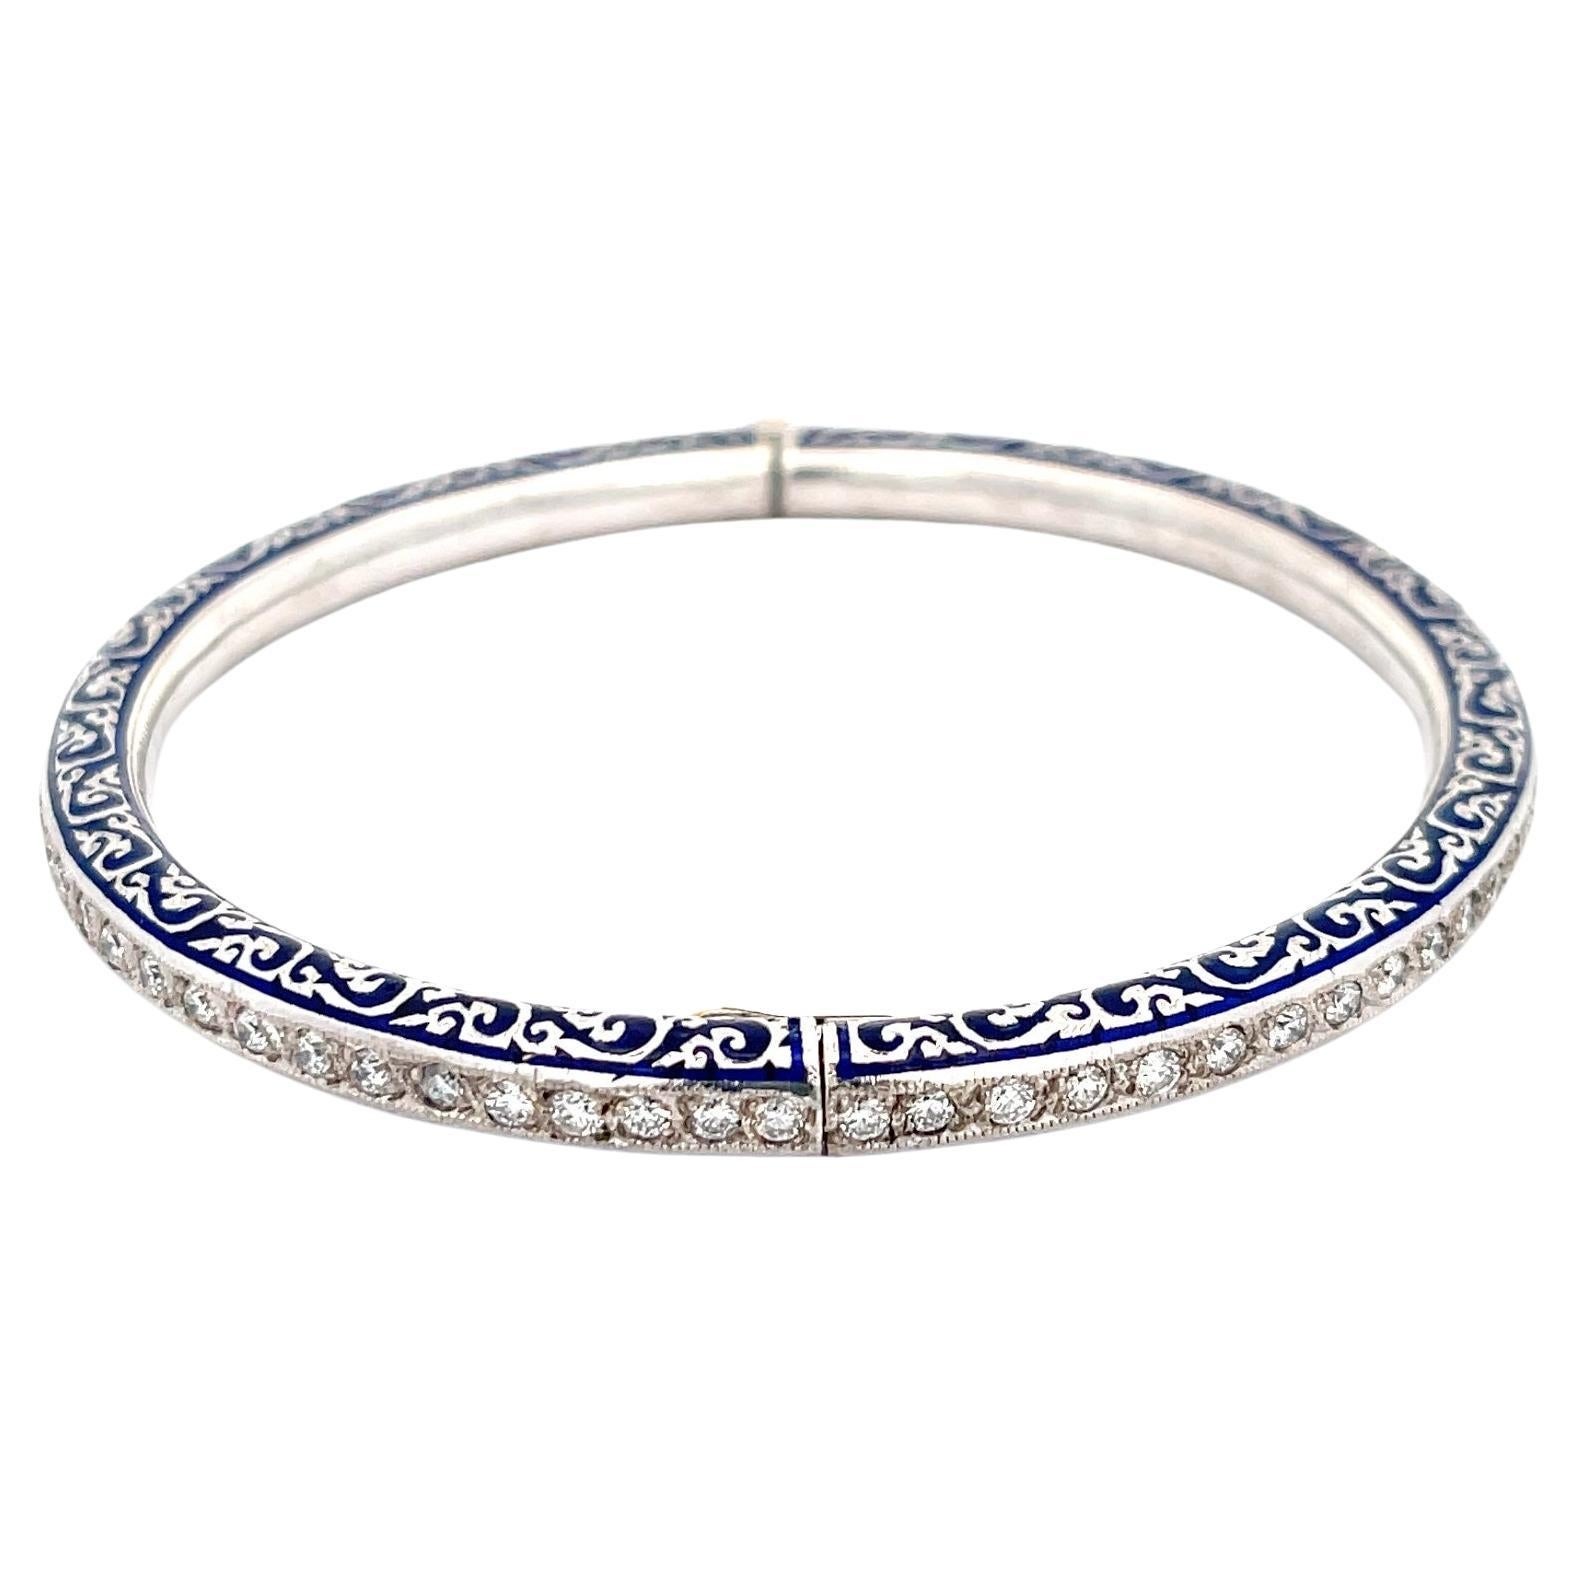 Blue Enamel & Diamond Bangle 18K White Gold. The bangle features approximately 2.16ctw of round diamonds, H color, SI1-I1 clarity. 
5.40mm wide
25 Grams